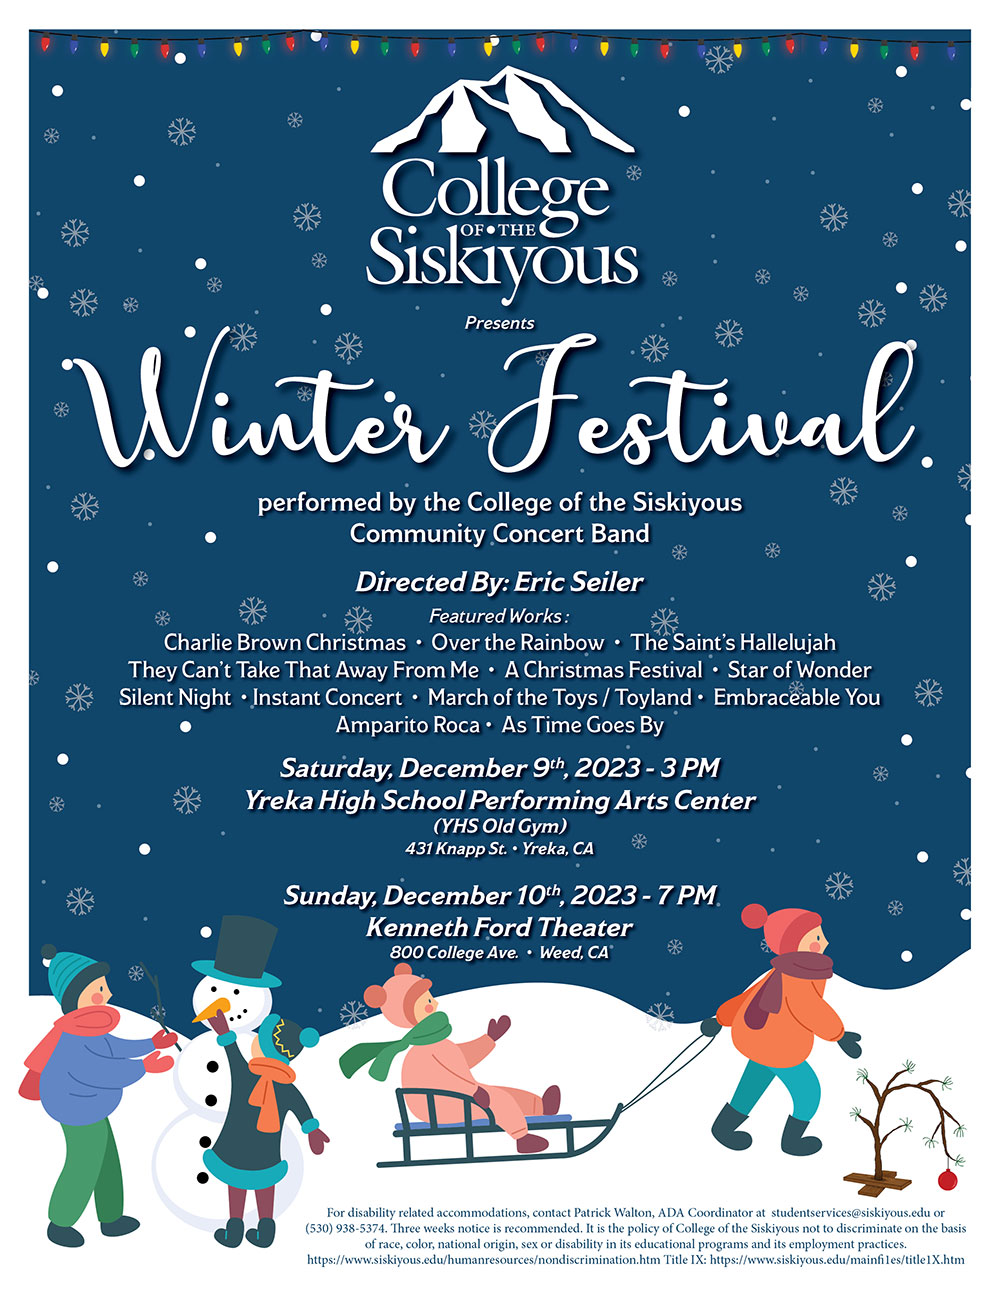 COS presents Winter Festival performed by the COS Community Concert Band. Directed by Erc Seiler. Saturday, December 9 at 3:00 pm, Yreka High School Performing Arts Center. Sunday, December 10 at 7:00 pm, Kenneth Ford Theater.